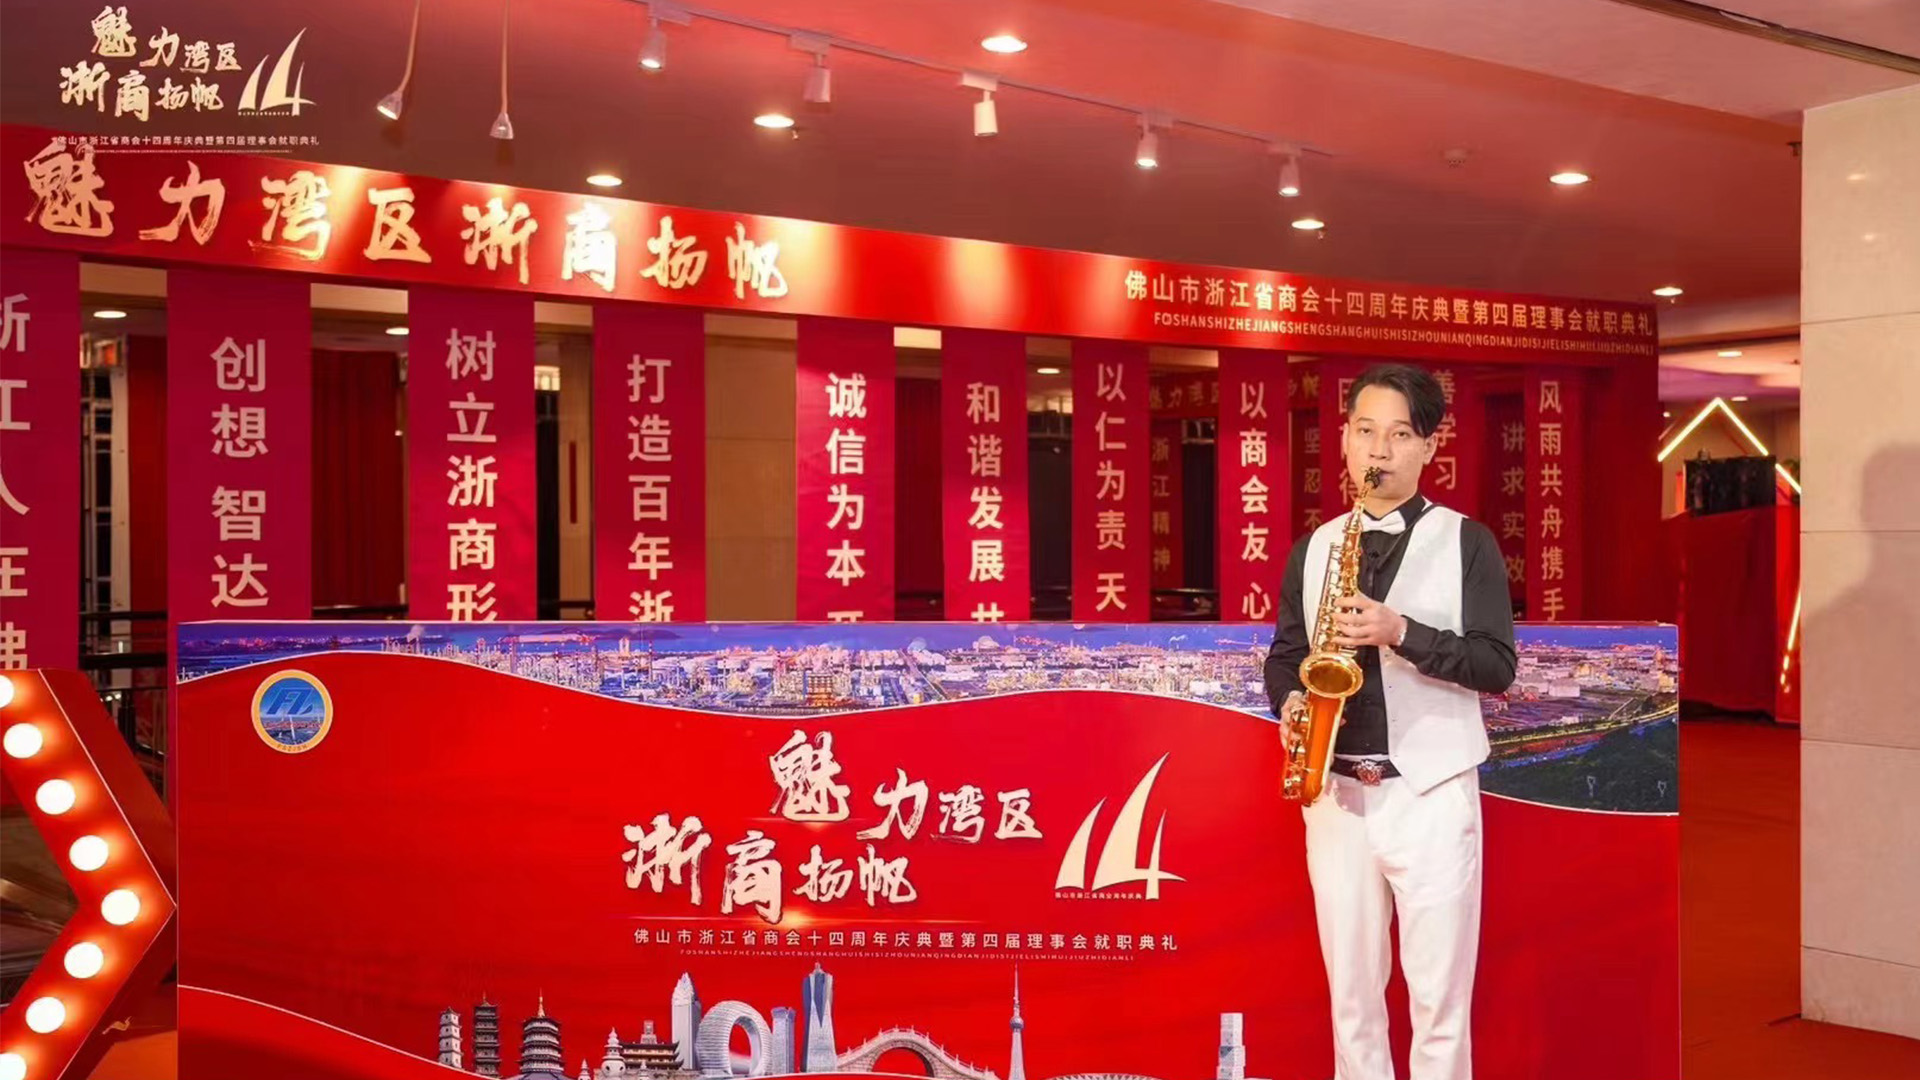 Grand Inaugural Ceremony of Zhejiang Chamber of Commerce Held in Foshan, Expertly Executed by D2 Studio_4